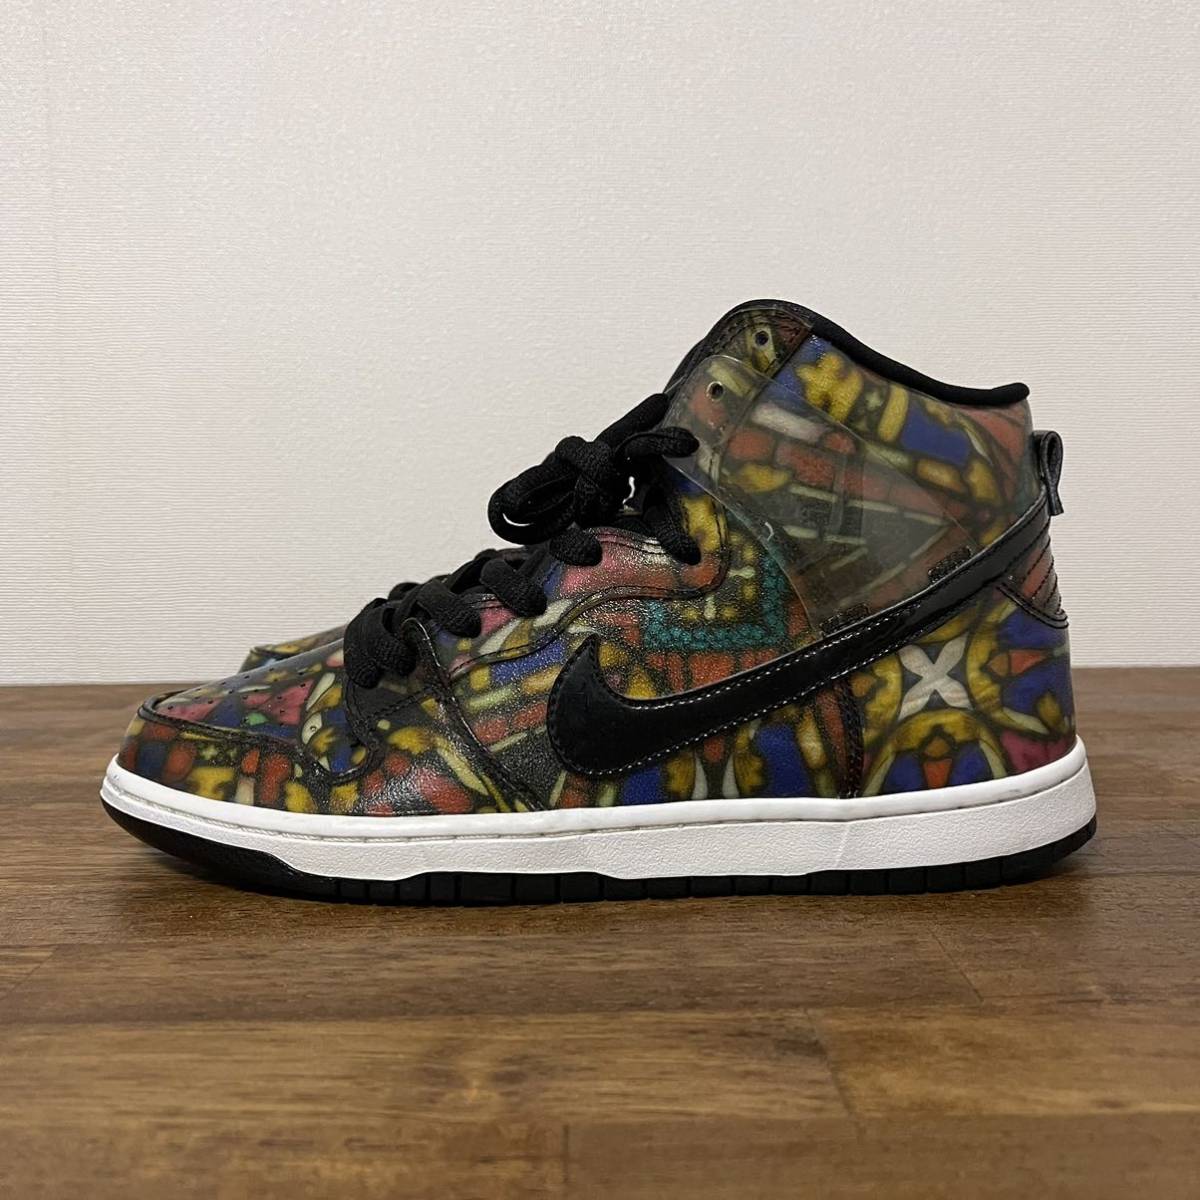 26.5cm Cncpts Nike SB Dunk High Stained Glass US8.5 26.5cm